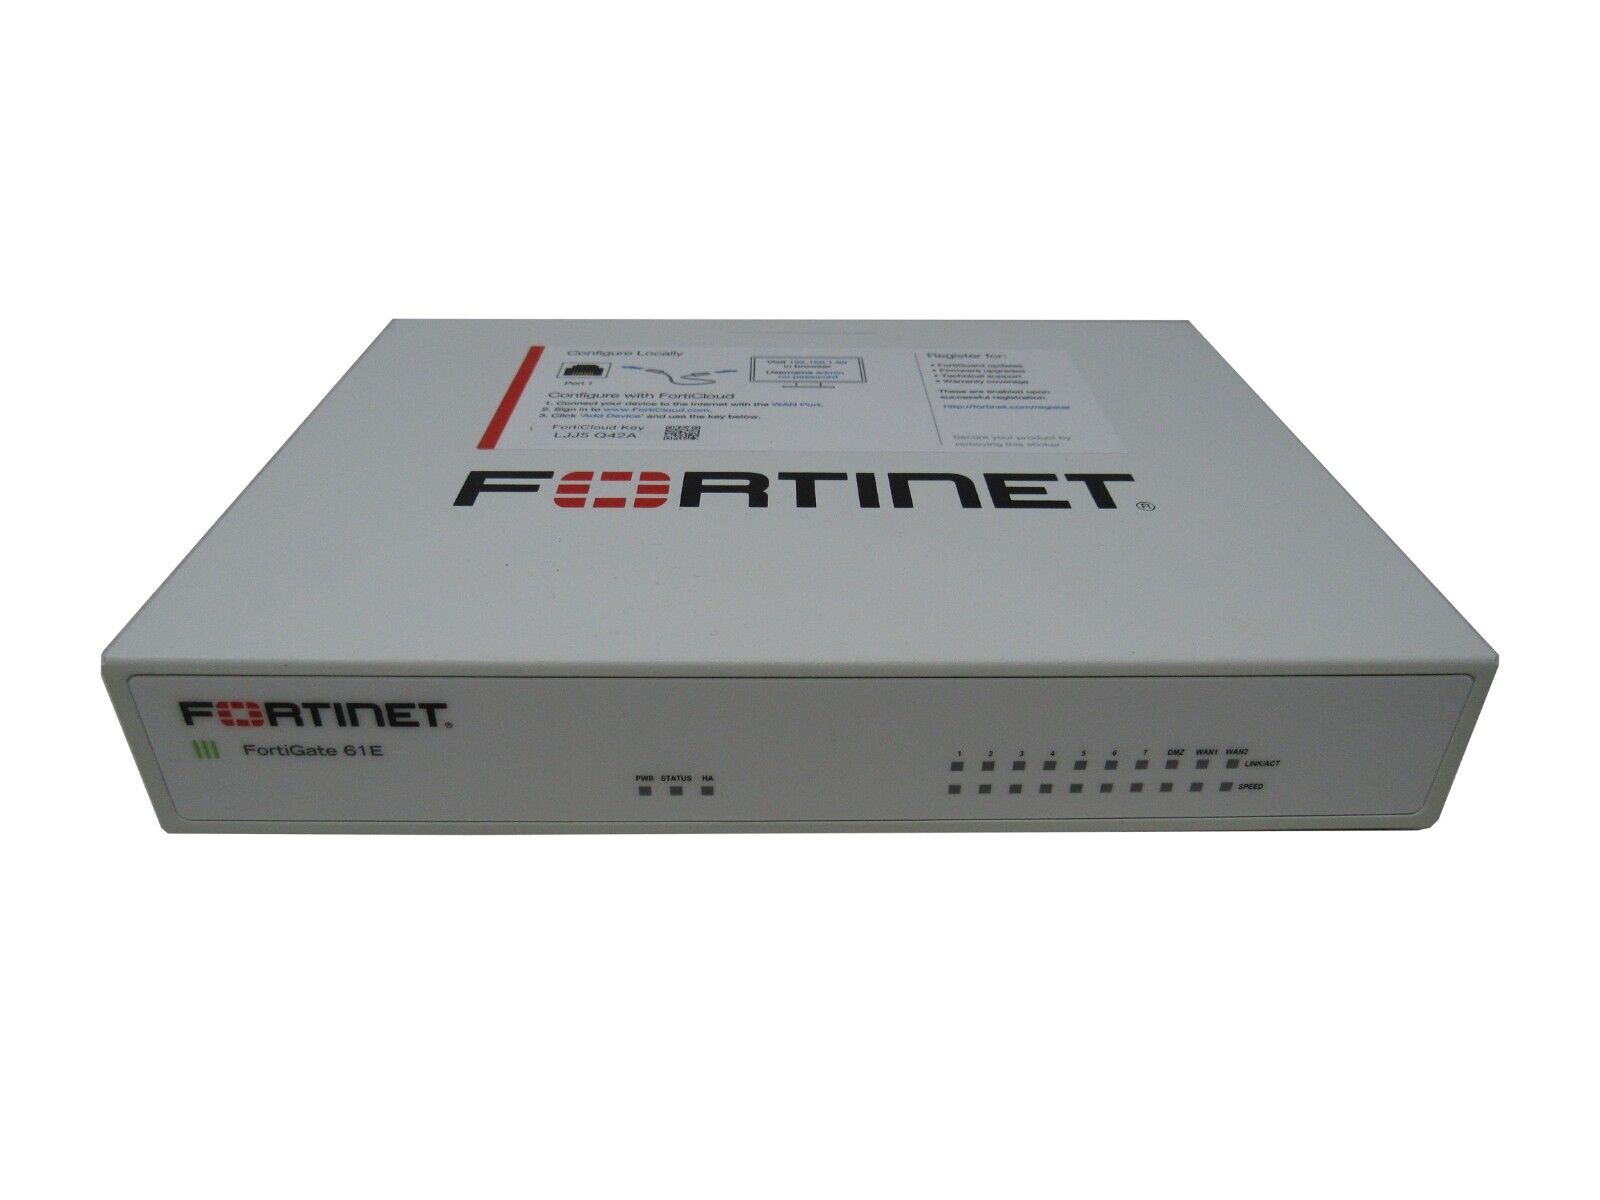 Fortinet Fortigate-61e Security Firewall Appliance - FG-61E - Used - No Support